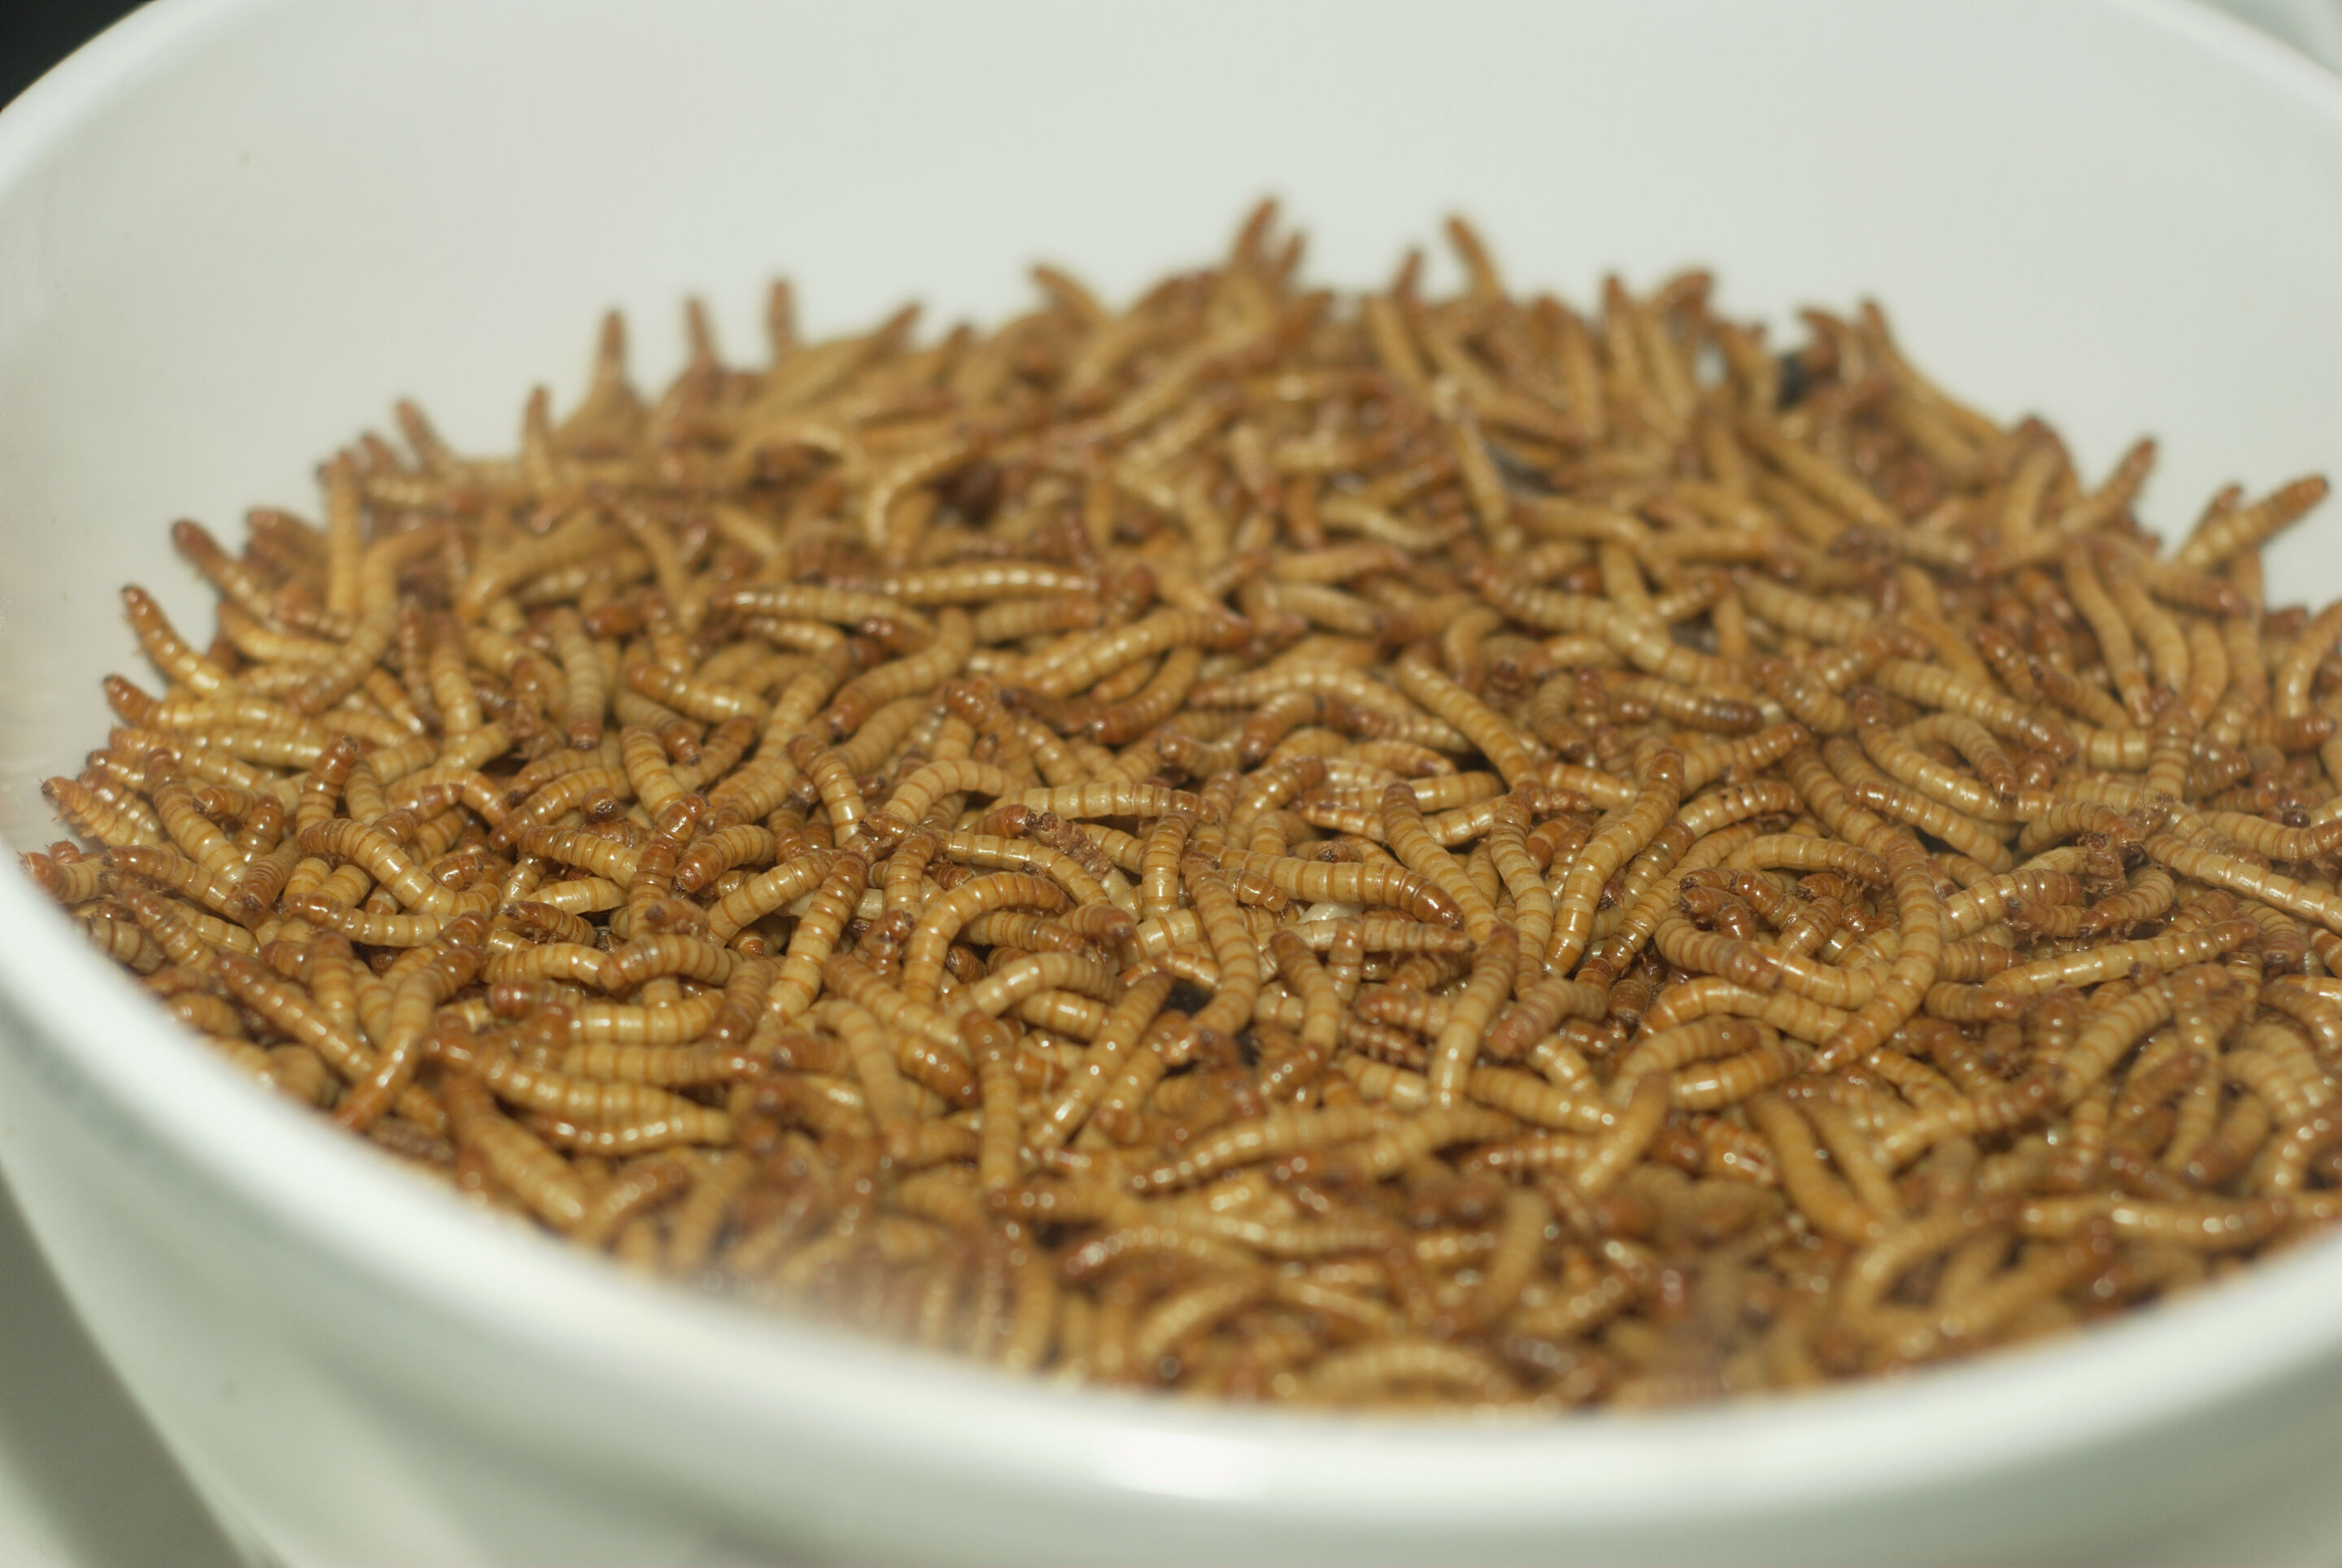 Cooking up mealworms into a tasty, healthful, 'meat-like' seasoning